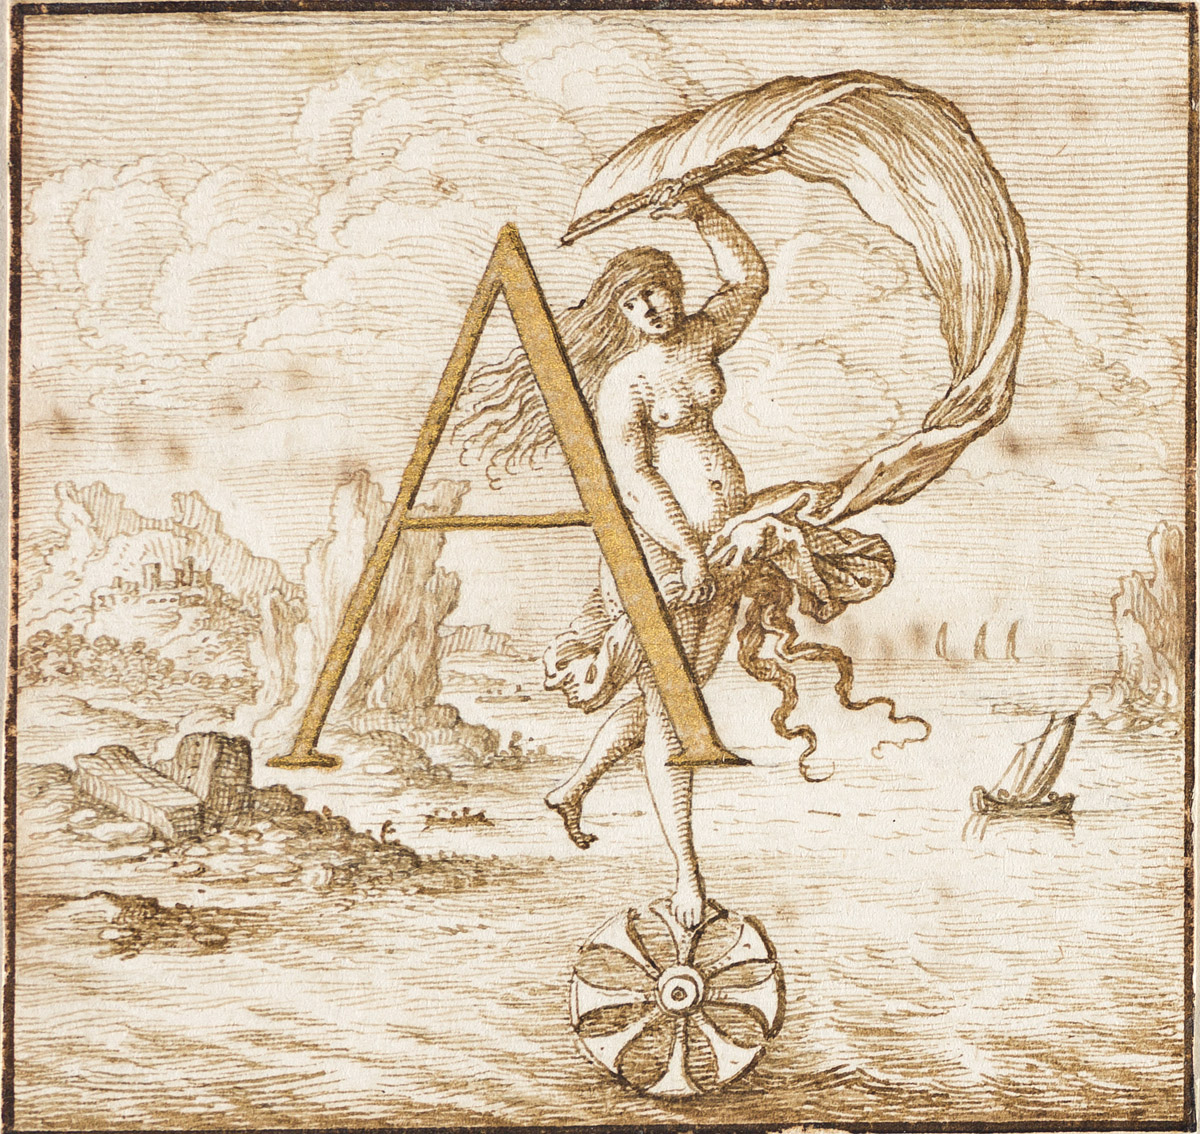 LIEVEN CRUYL (Ghent 1634-1709 Ghent) Group of 4 decorative designs for initial letters.